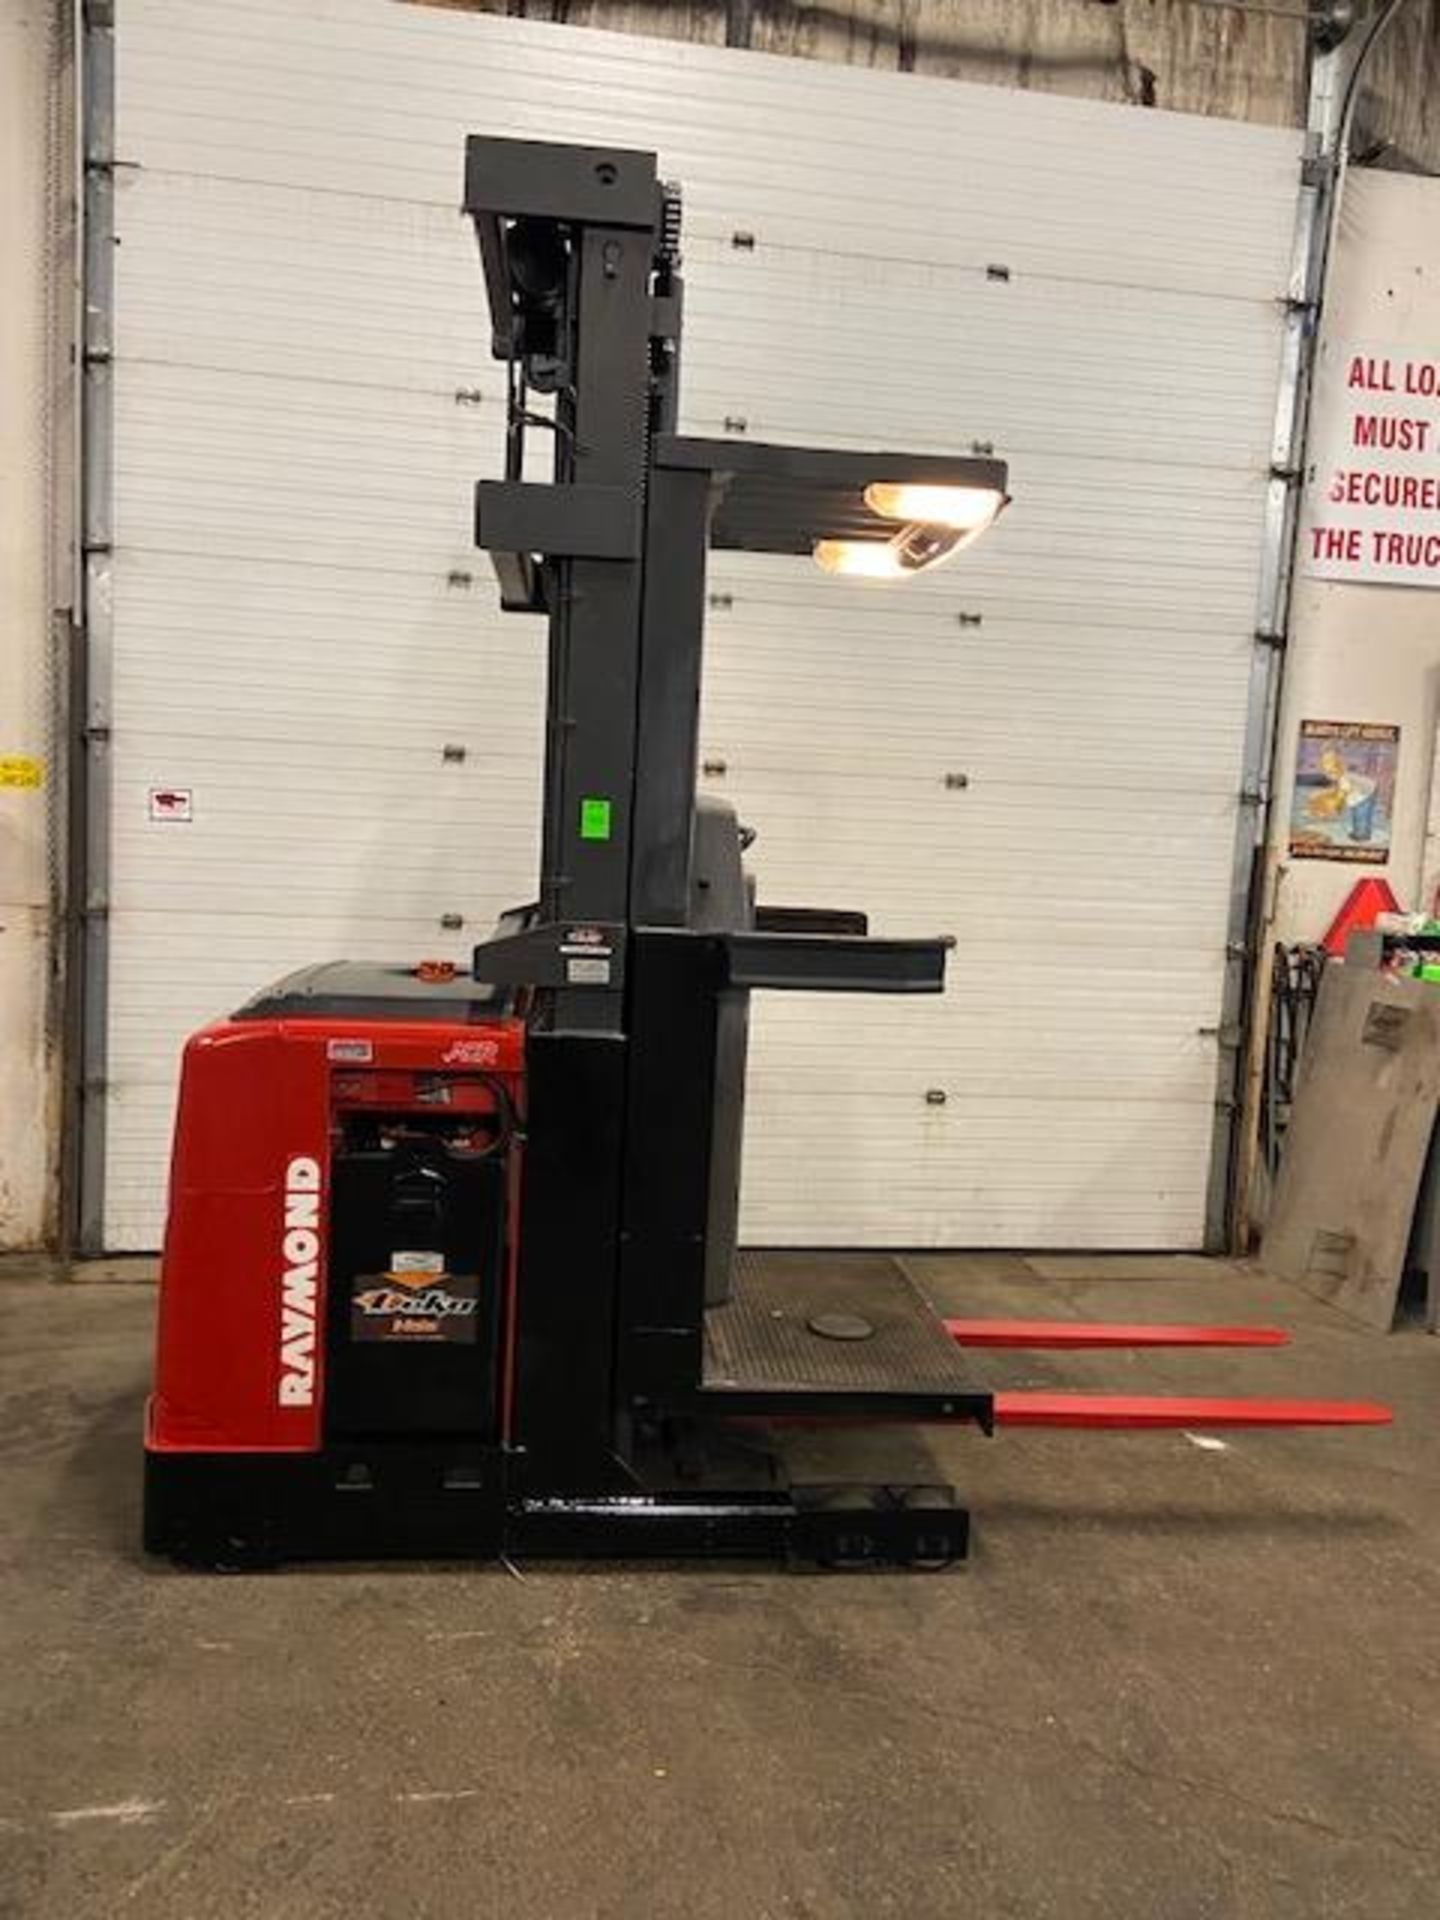 FREE CUSTOMS - 2008 Raymond Order Picker Electric Powered Pallet Cart Lifter LOW HOURS - 118" high